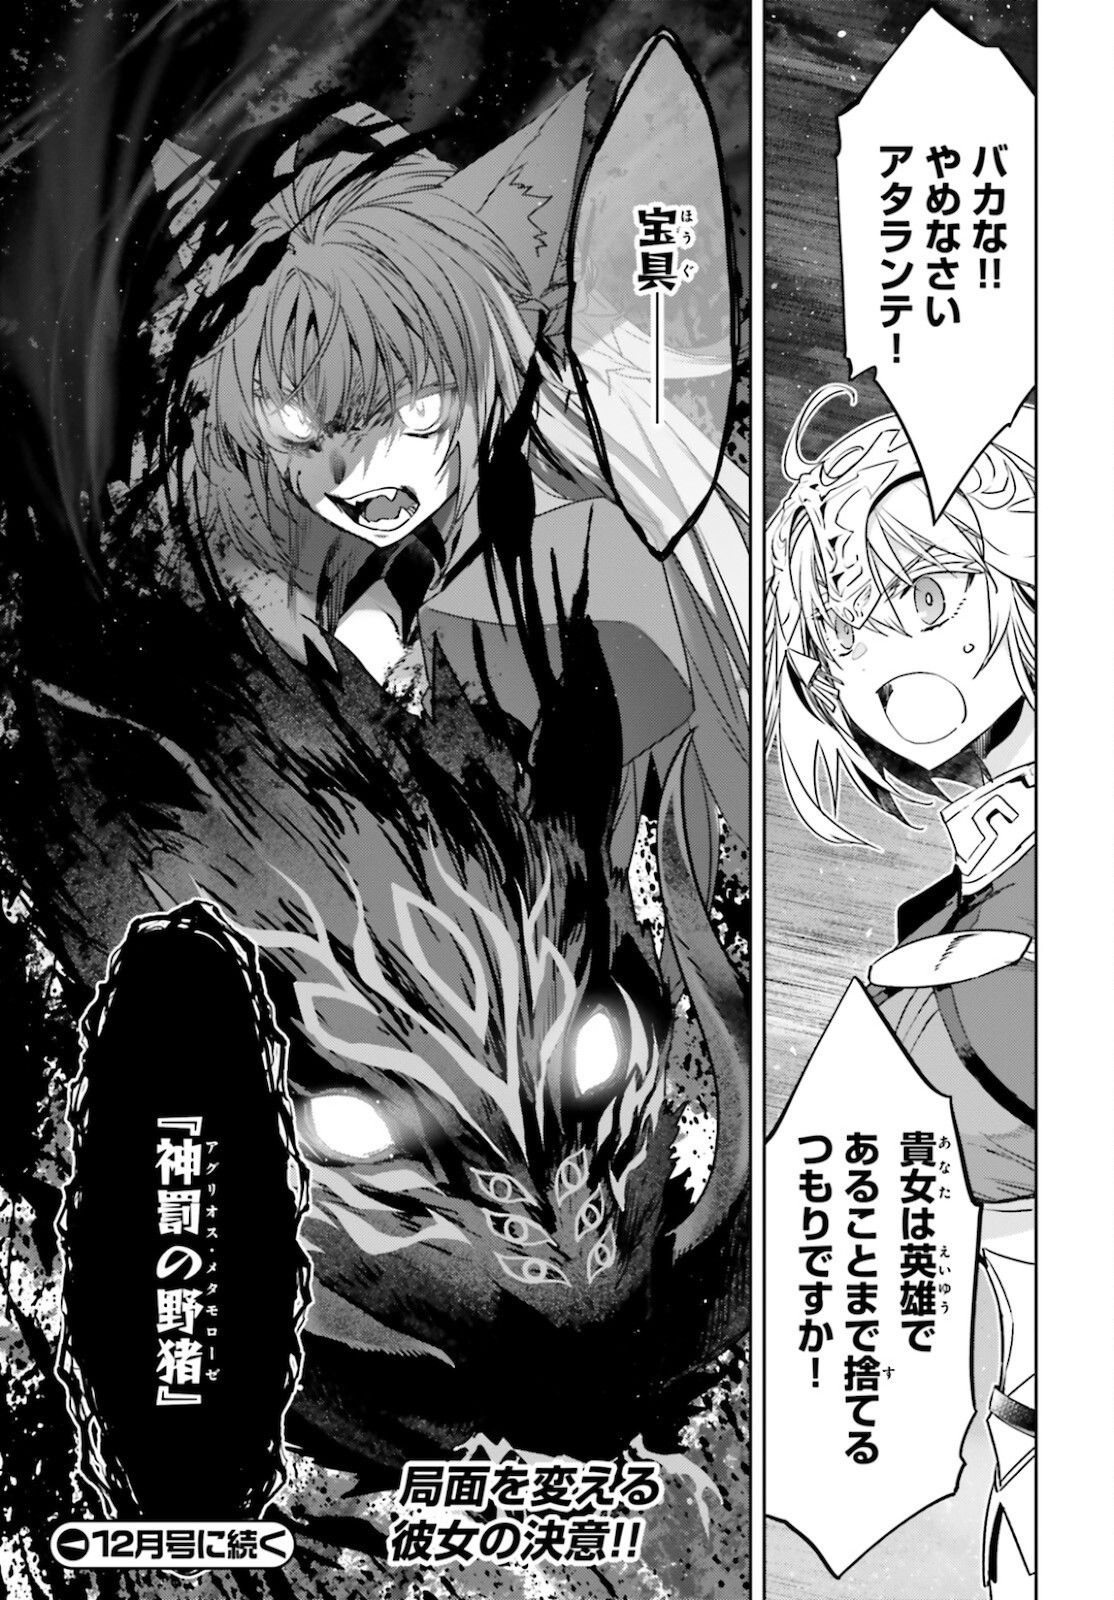 Fate-Apocrypha - Chapter 55-1 - Page 9